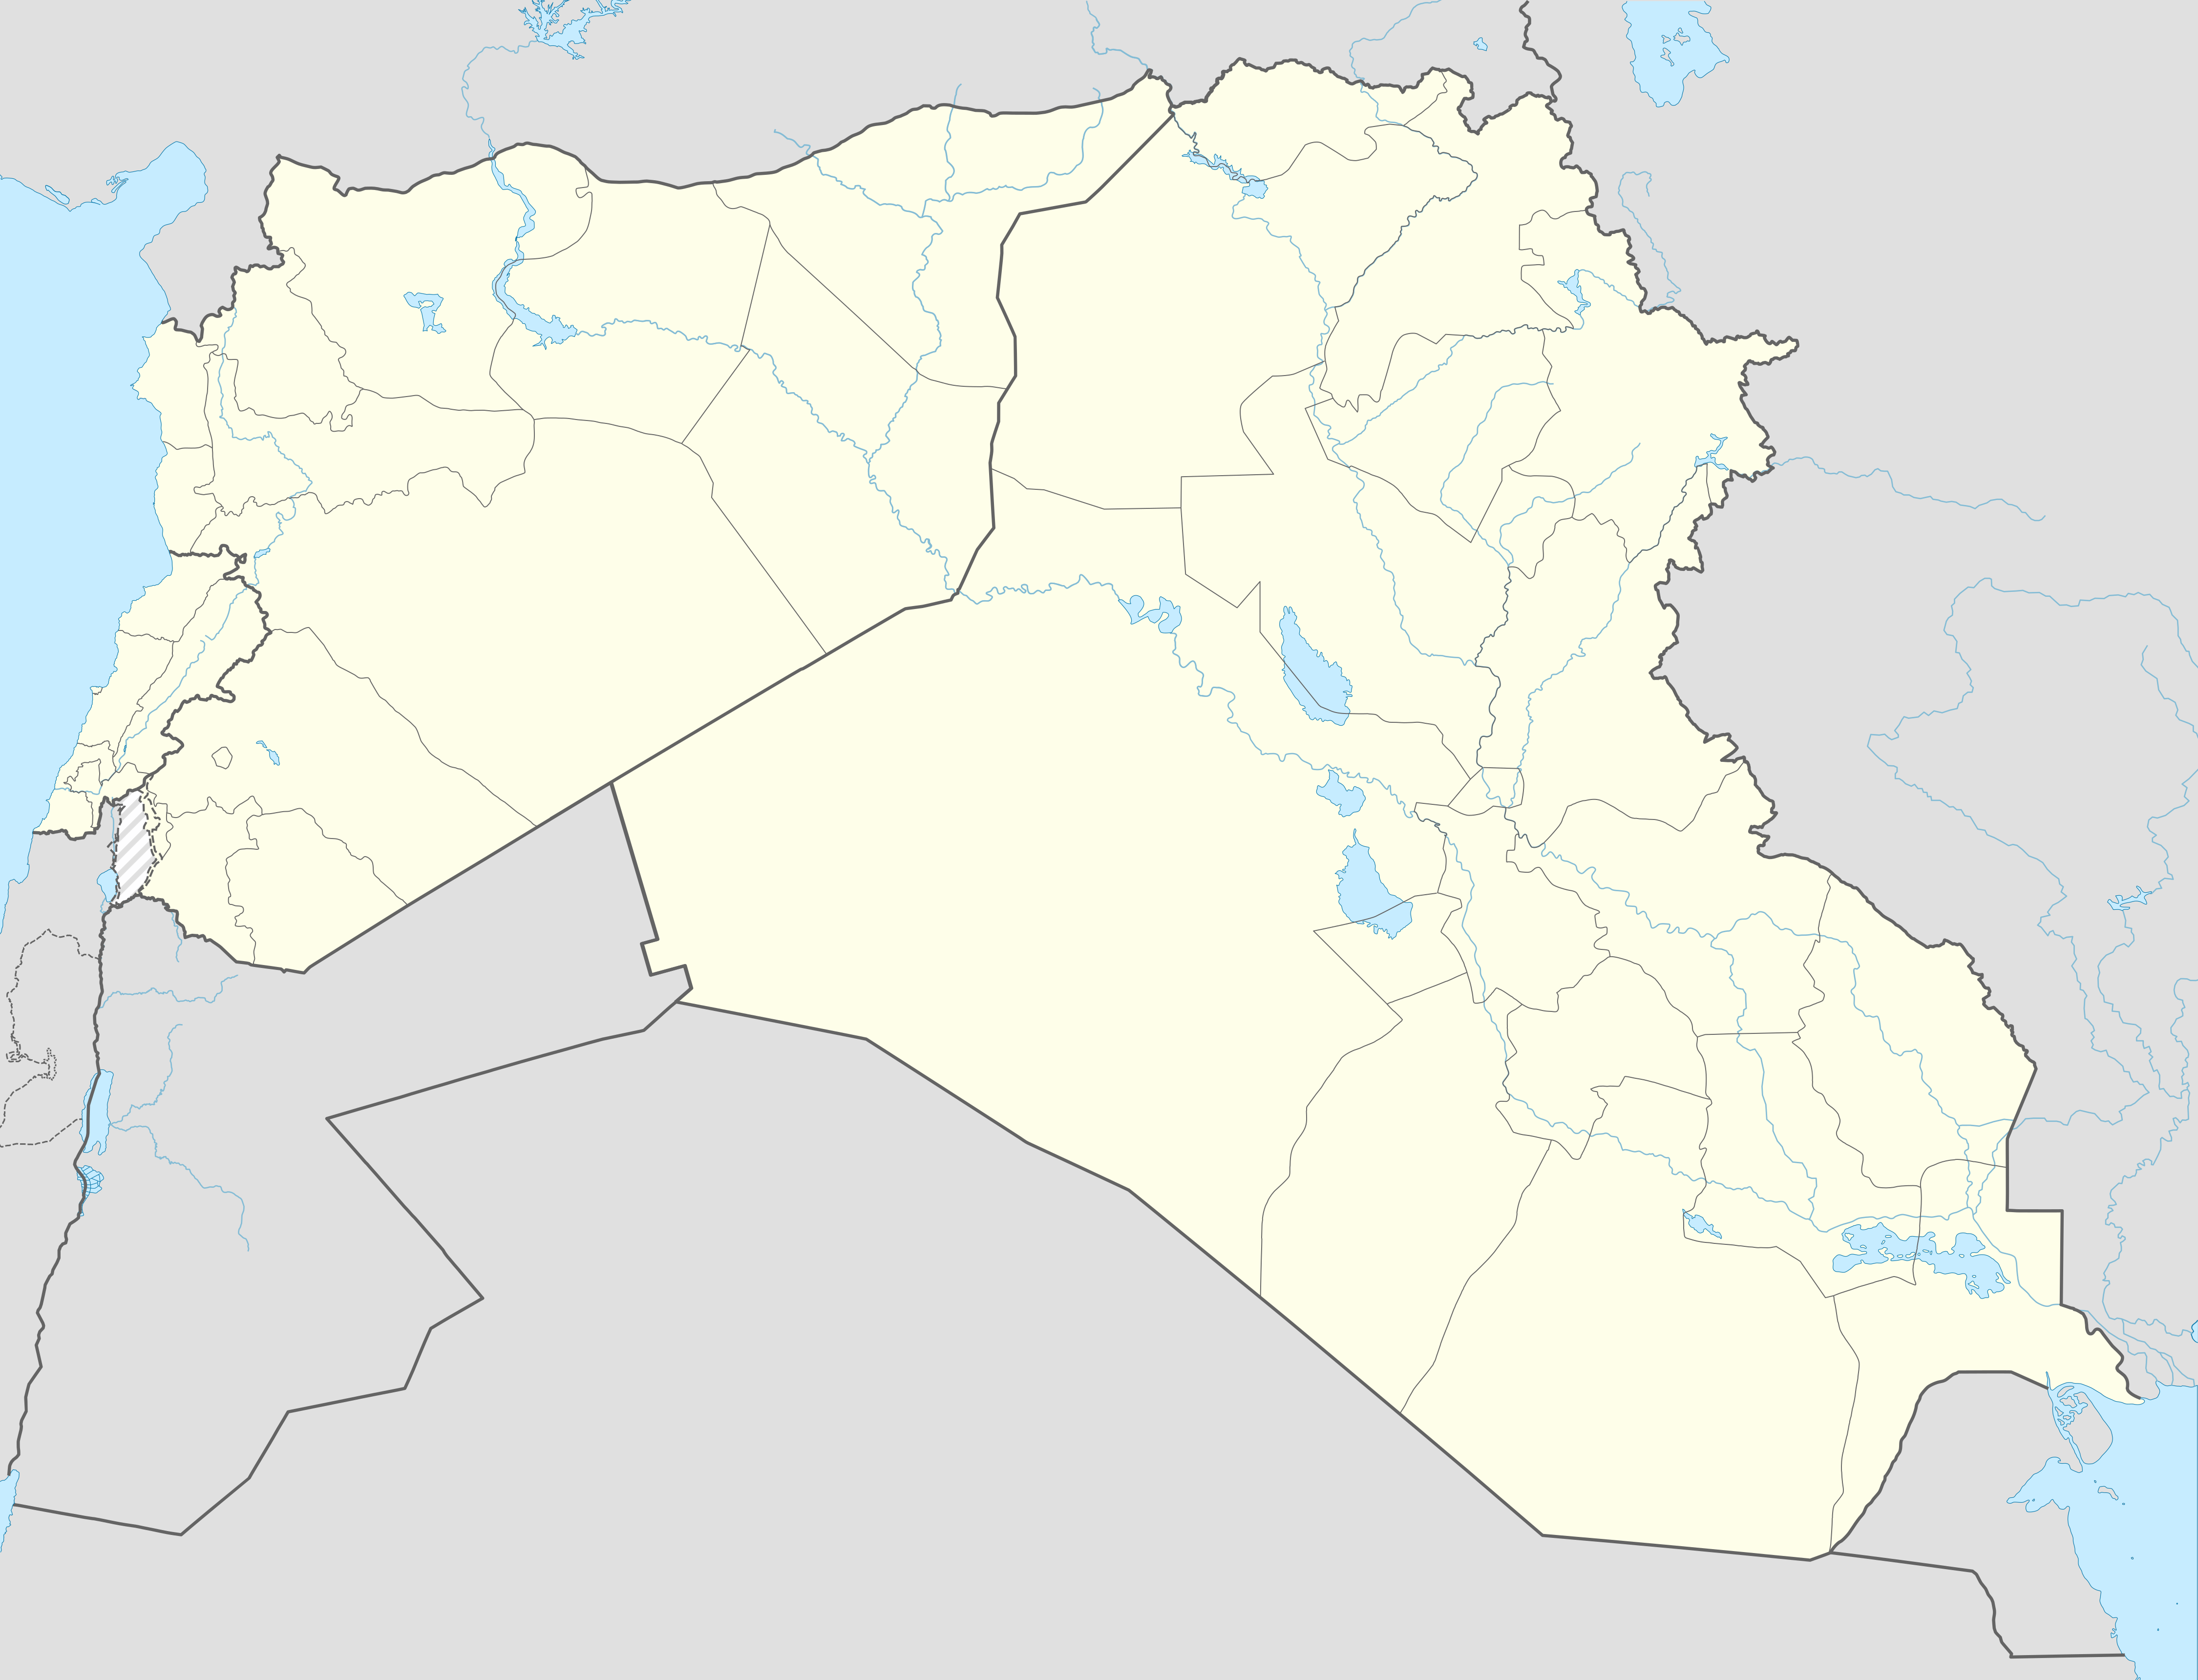 Syrian, Iraqi, and Lebanese insurgencies detailed map/doc is located in Syria-Iraq-Lebanon